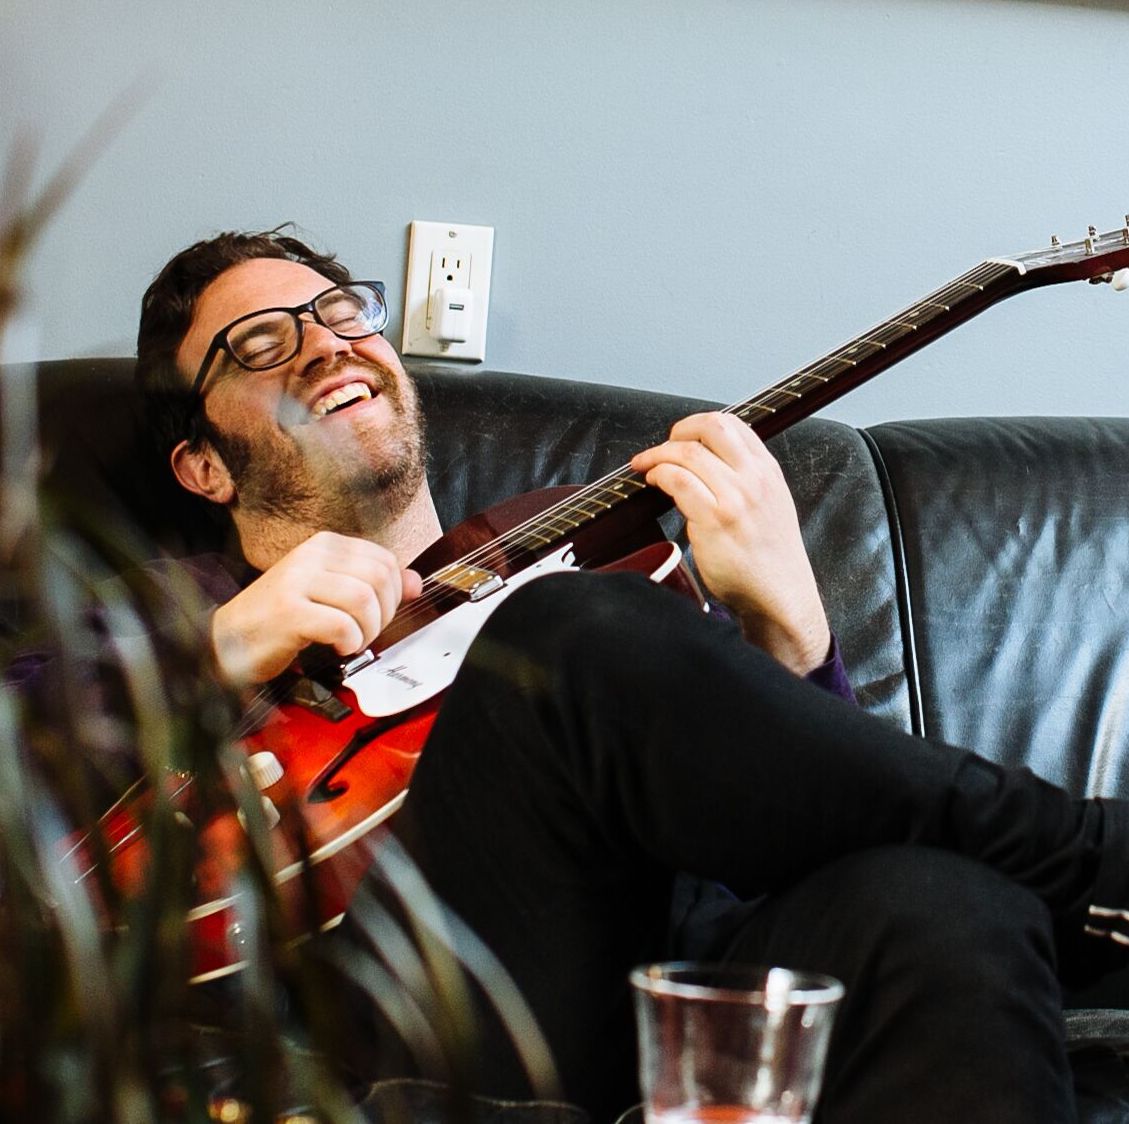 Joel with a guitar, sitting on a couch smiling.